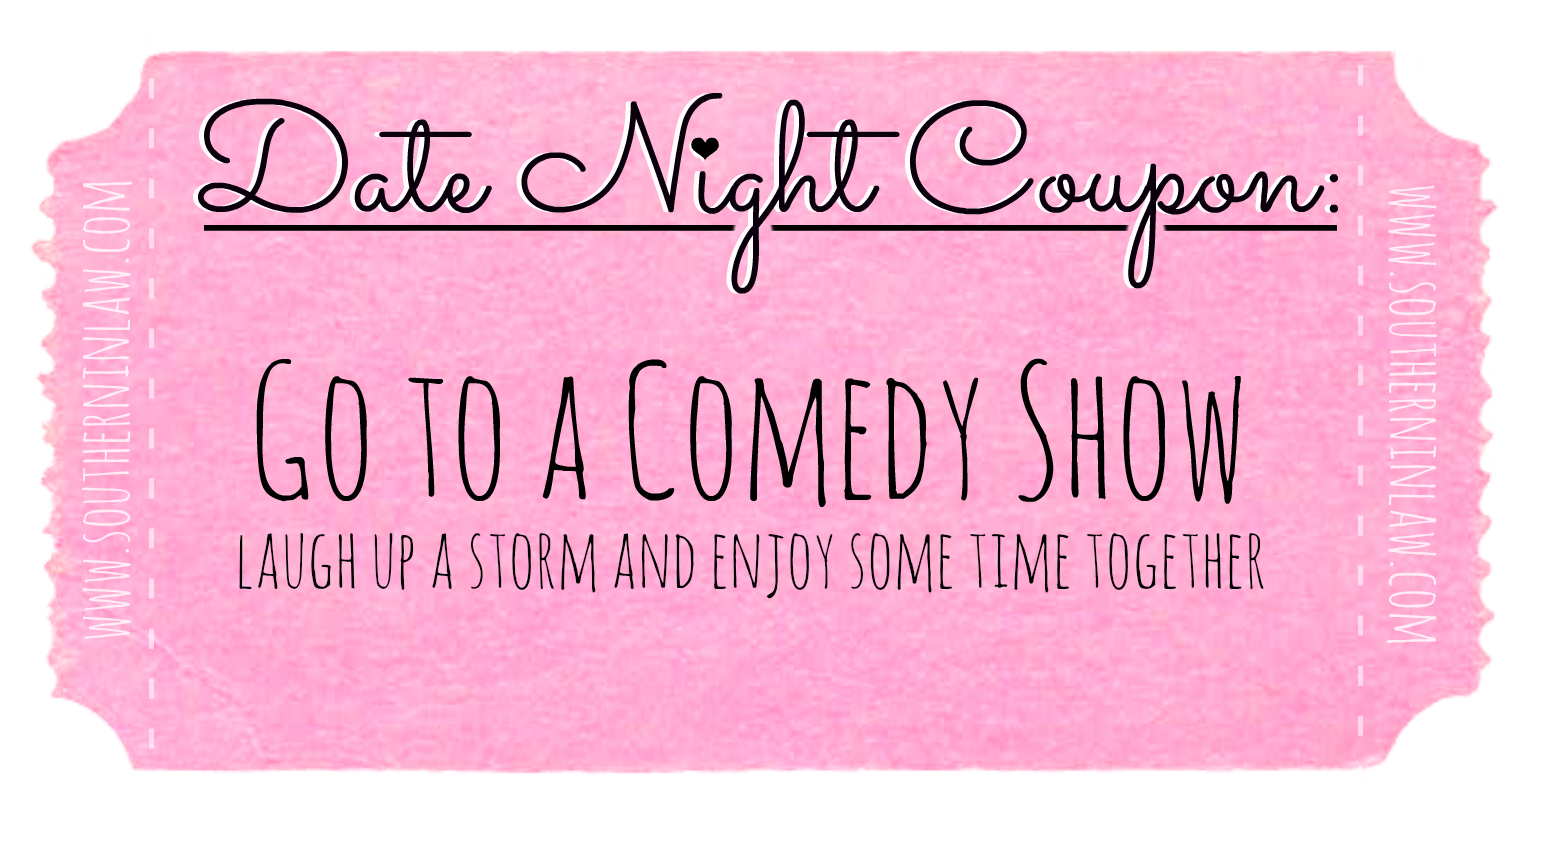 Affordable Date Ideas - Date Night Coupons - Go to a Comedy Show